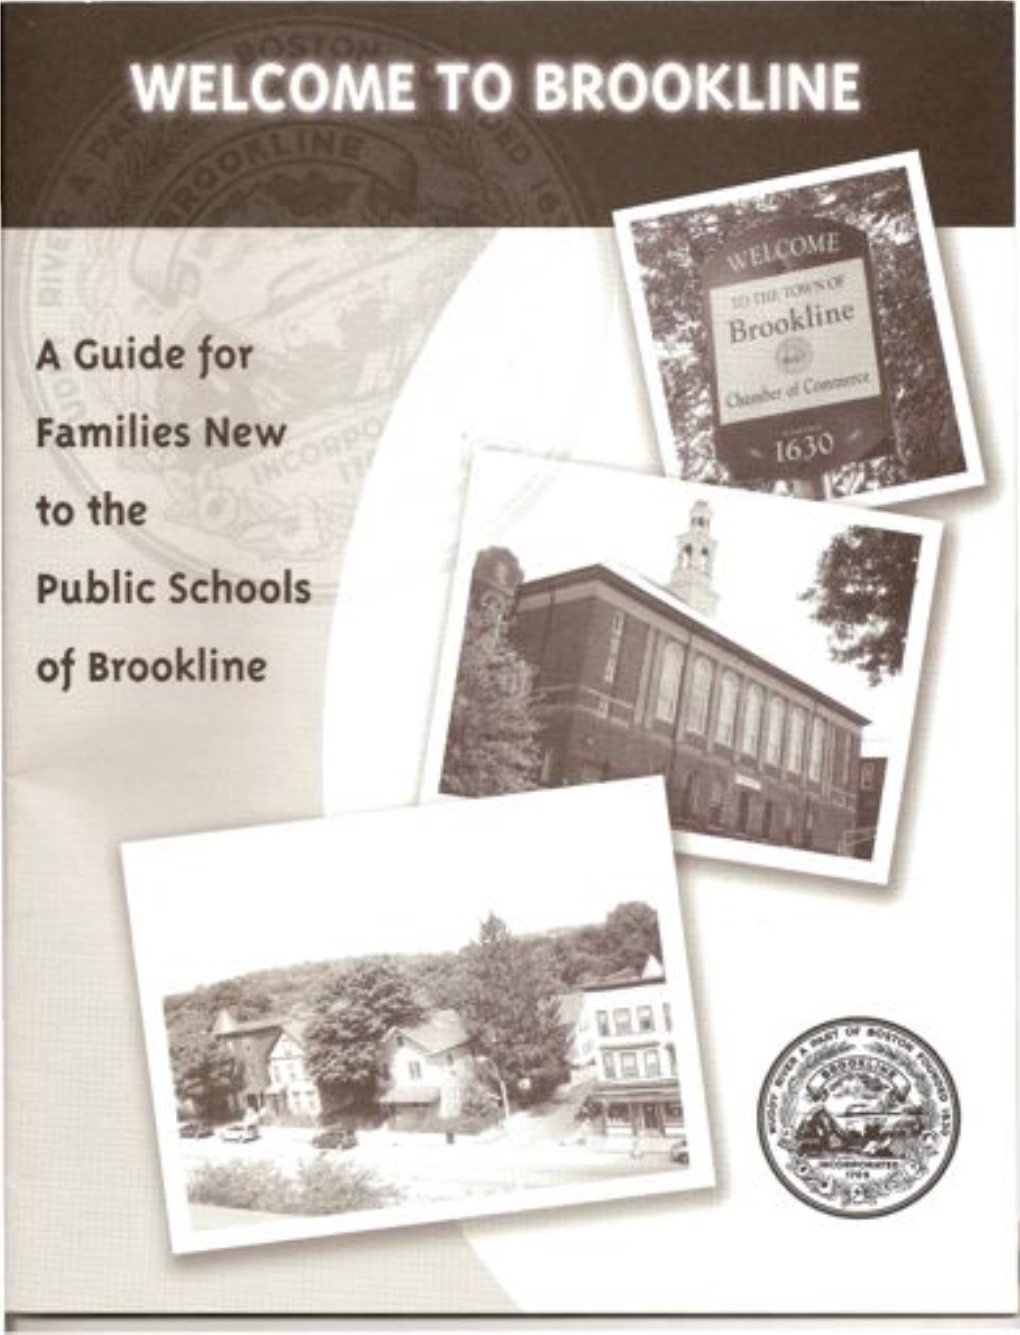 Families New to the Public Schools of Brookline Welcome to Brookline: ~~ a Guide for Families New to the Public Schools of Brookline